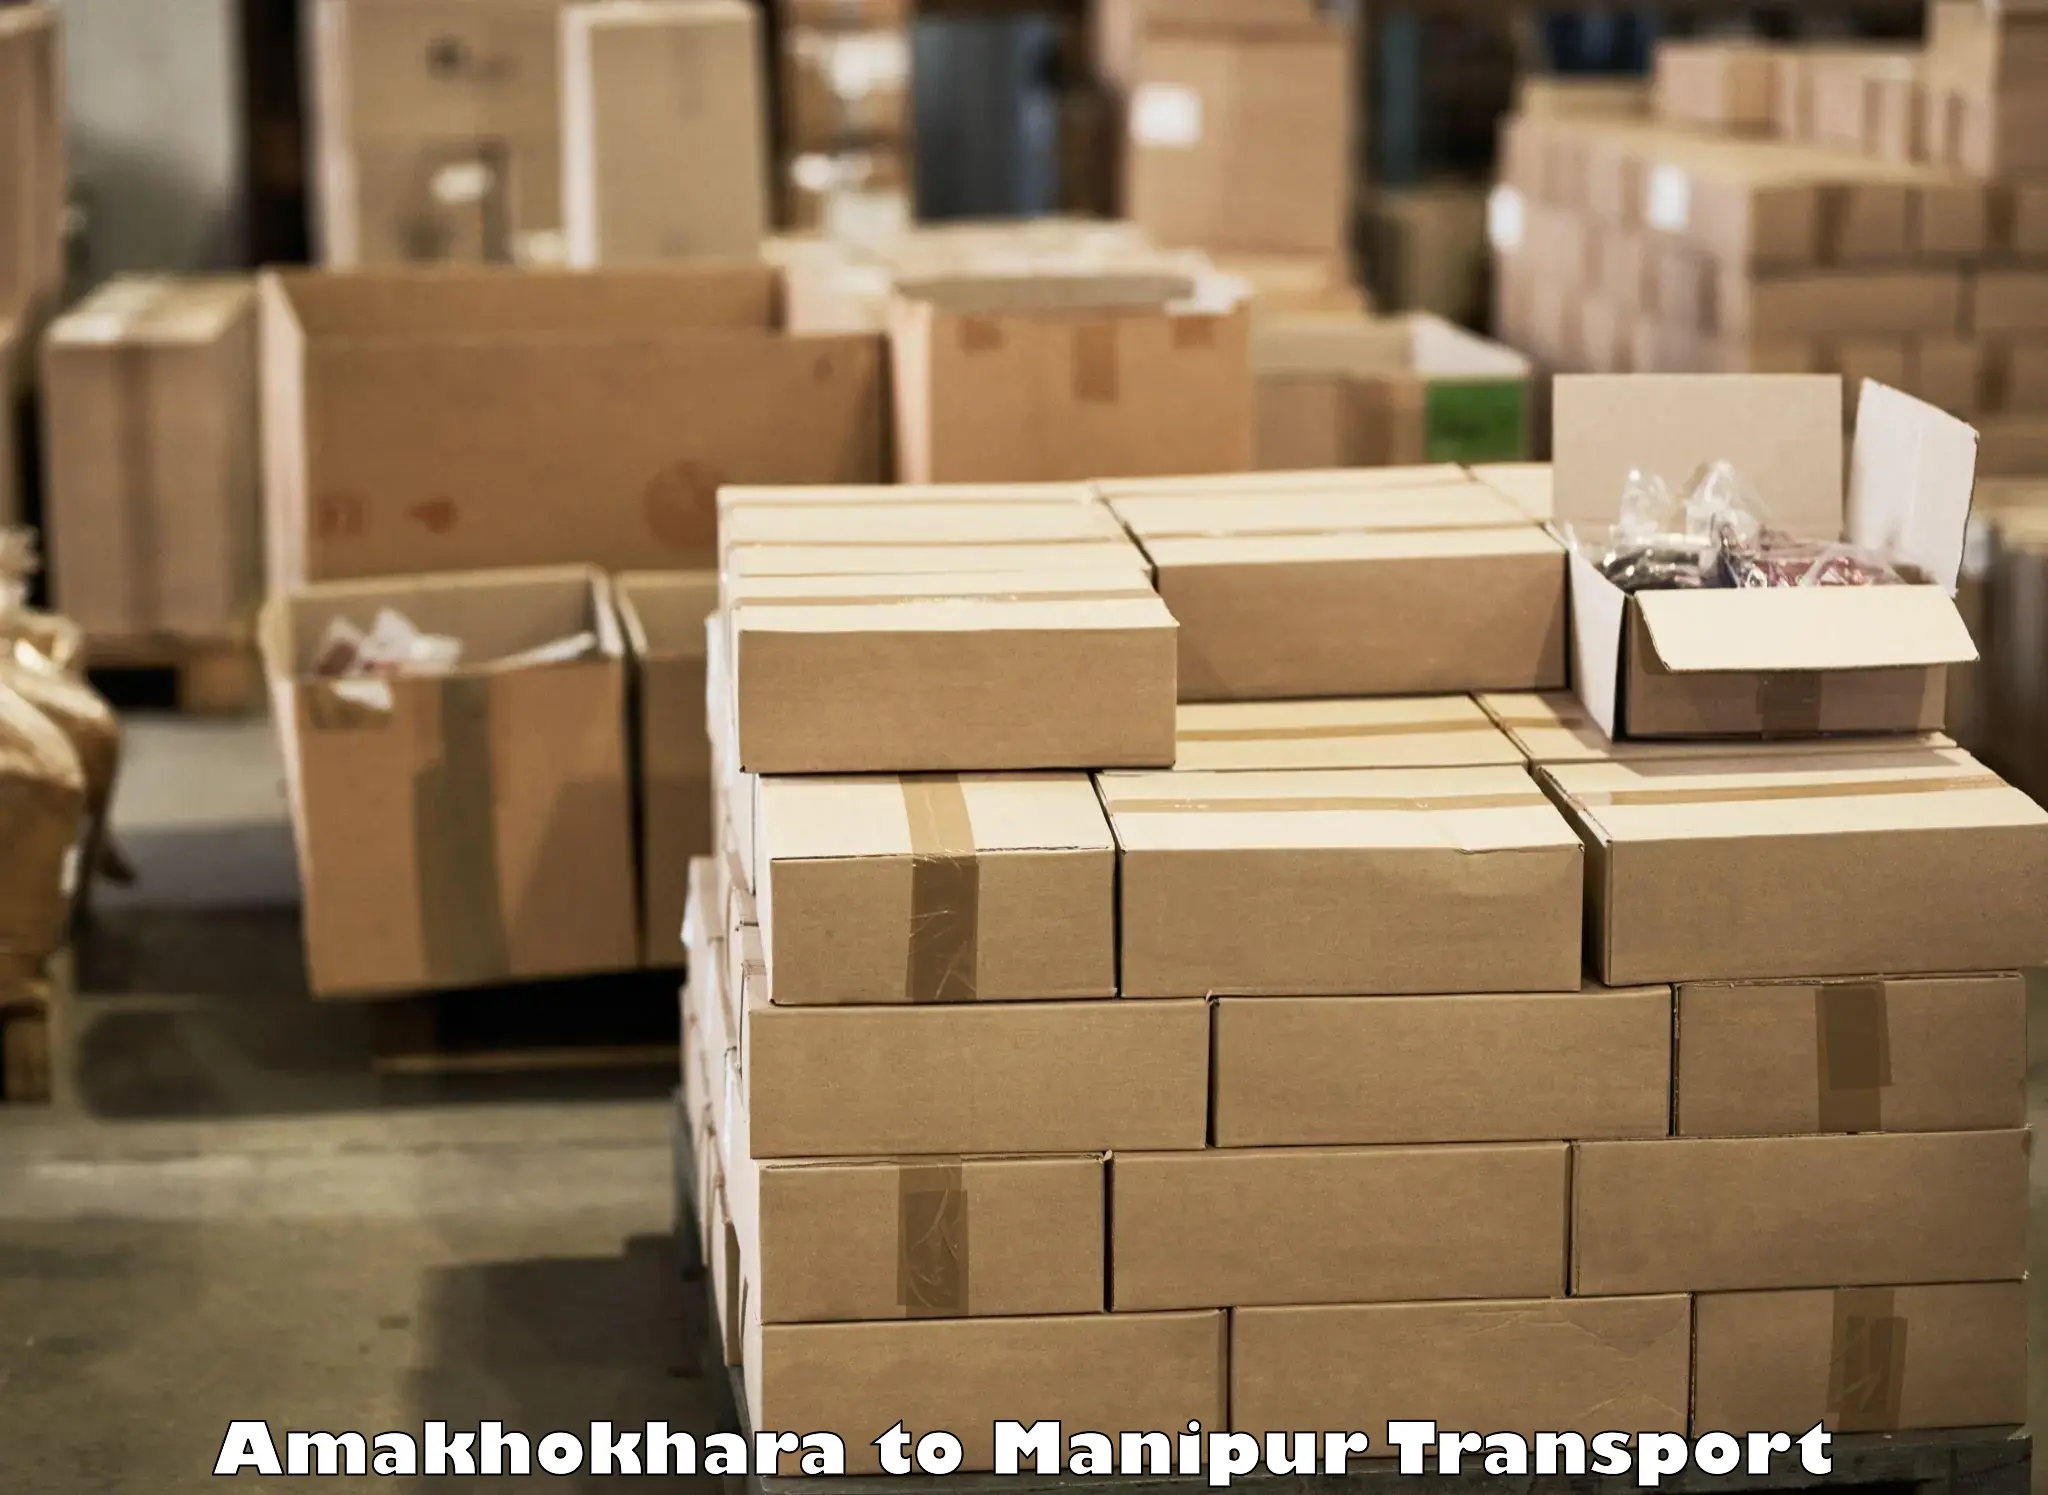 Daily parcel service transport in Amakhokhara to Manipur